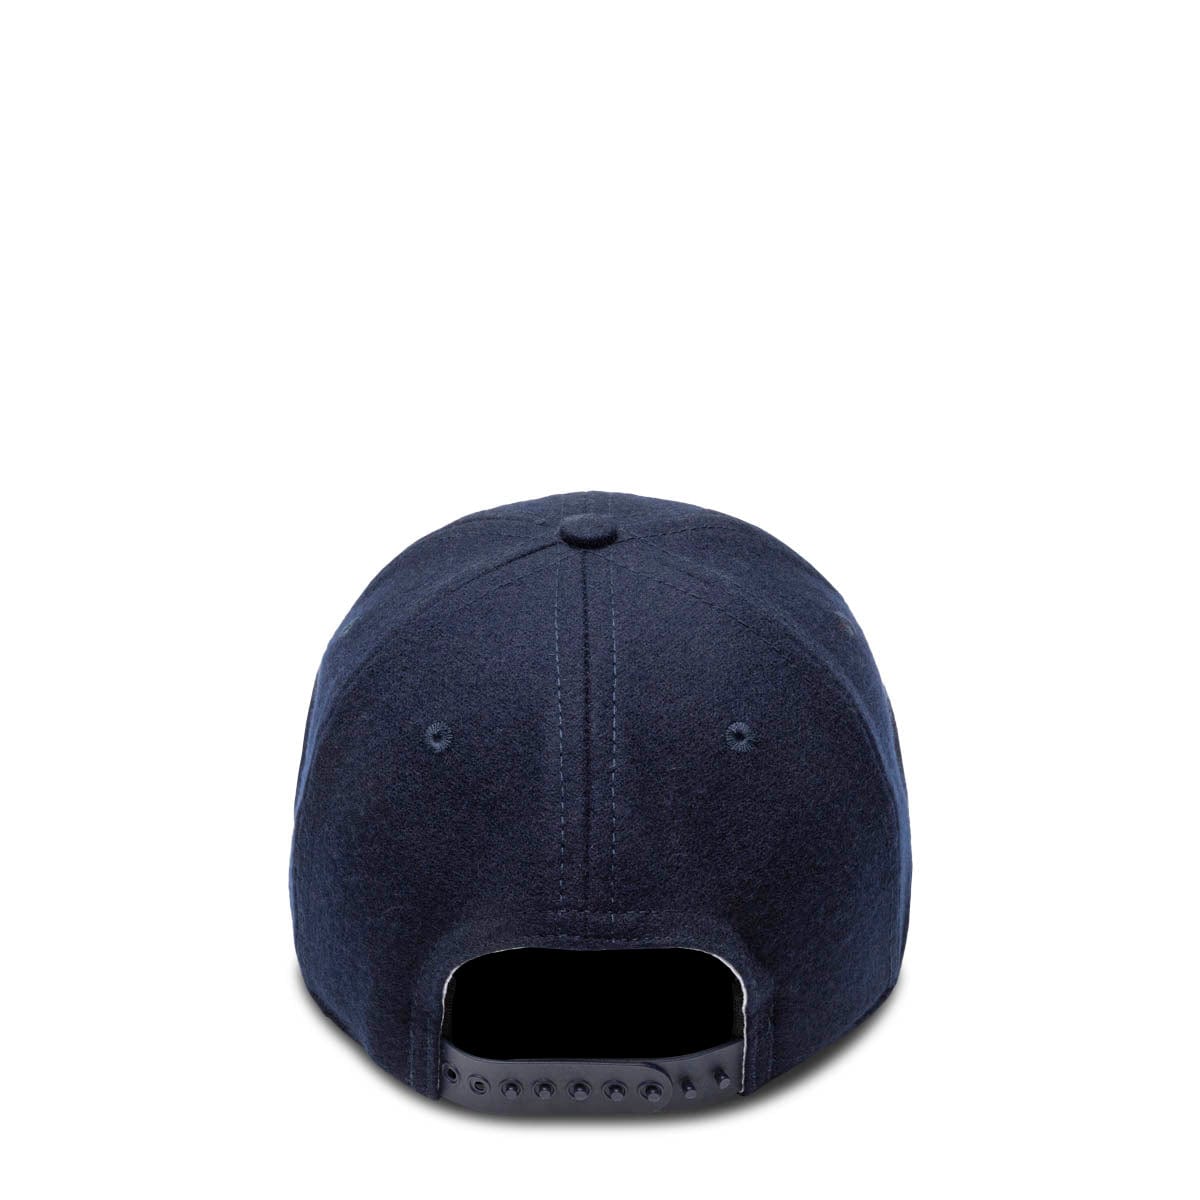 Ebbets Accessories - HATS - Snapback-Fitted Hat NAVY / O/S EBBETS HAT